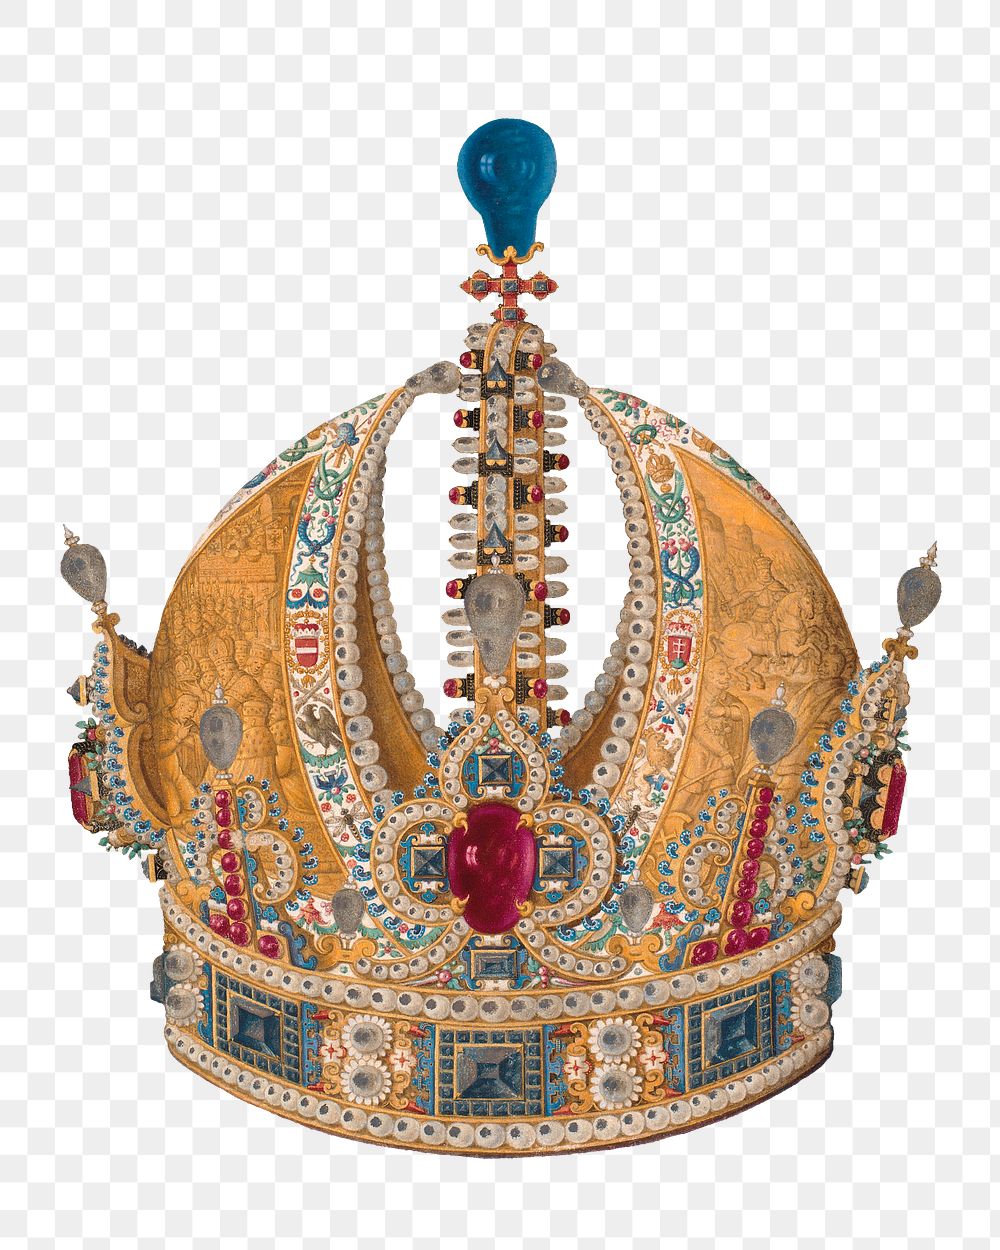 Crown of Rudolph II png, vintage illustration by David Hartmann on transparent background. Remixed by rawpixel.